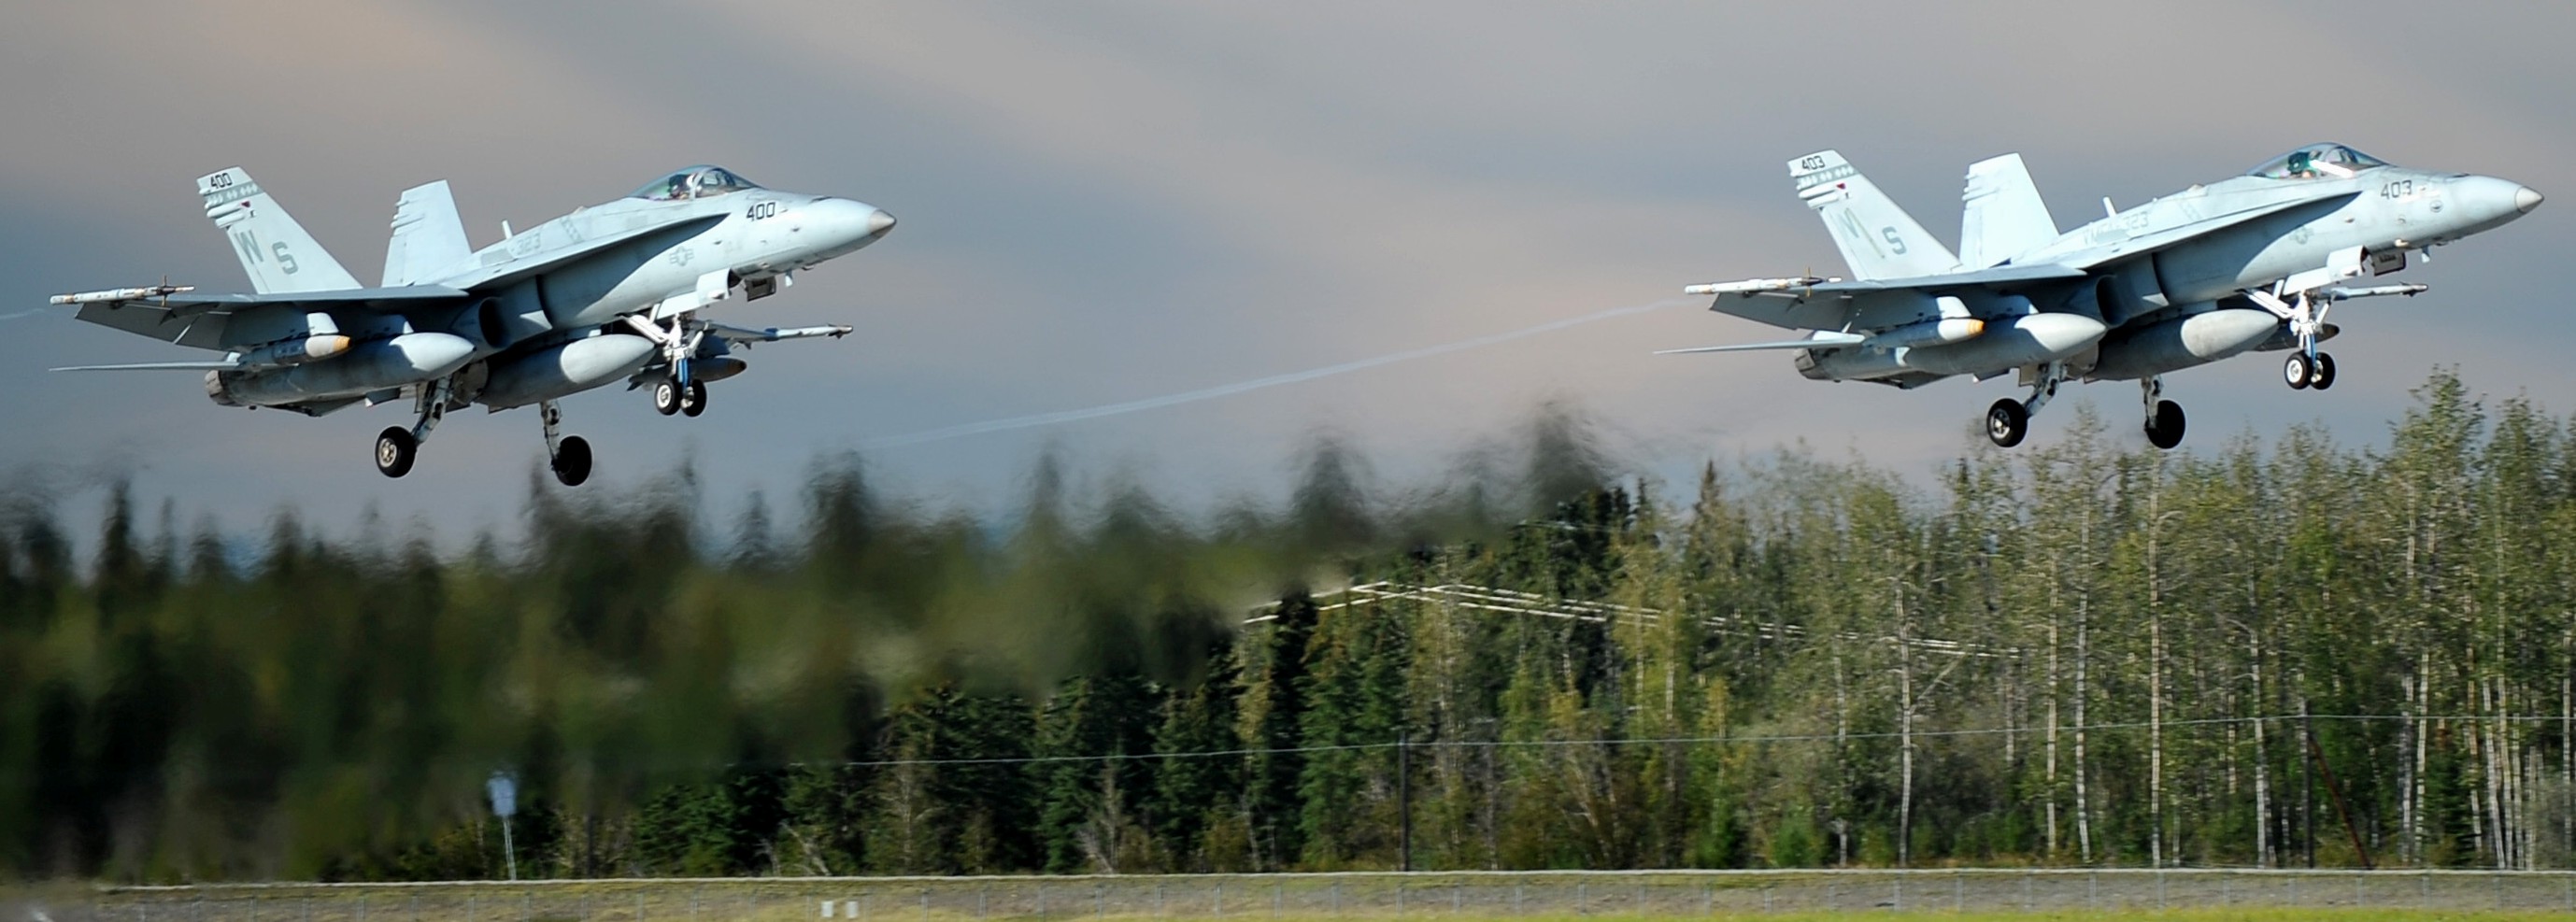 vmfa-323 death rattlers marine fighter attack squadron f/a-18c hornet 157 exercise red flag alaska eielson afb